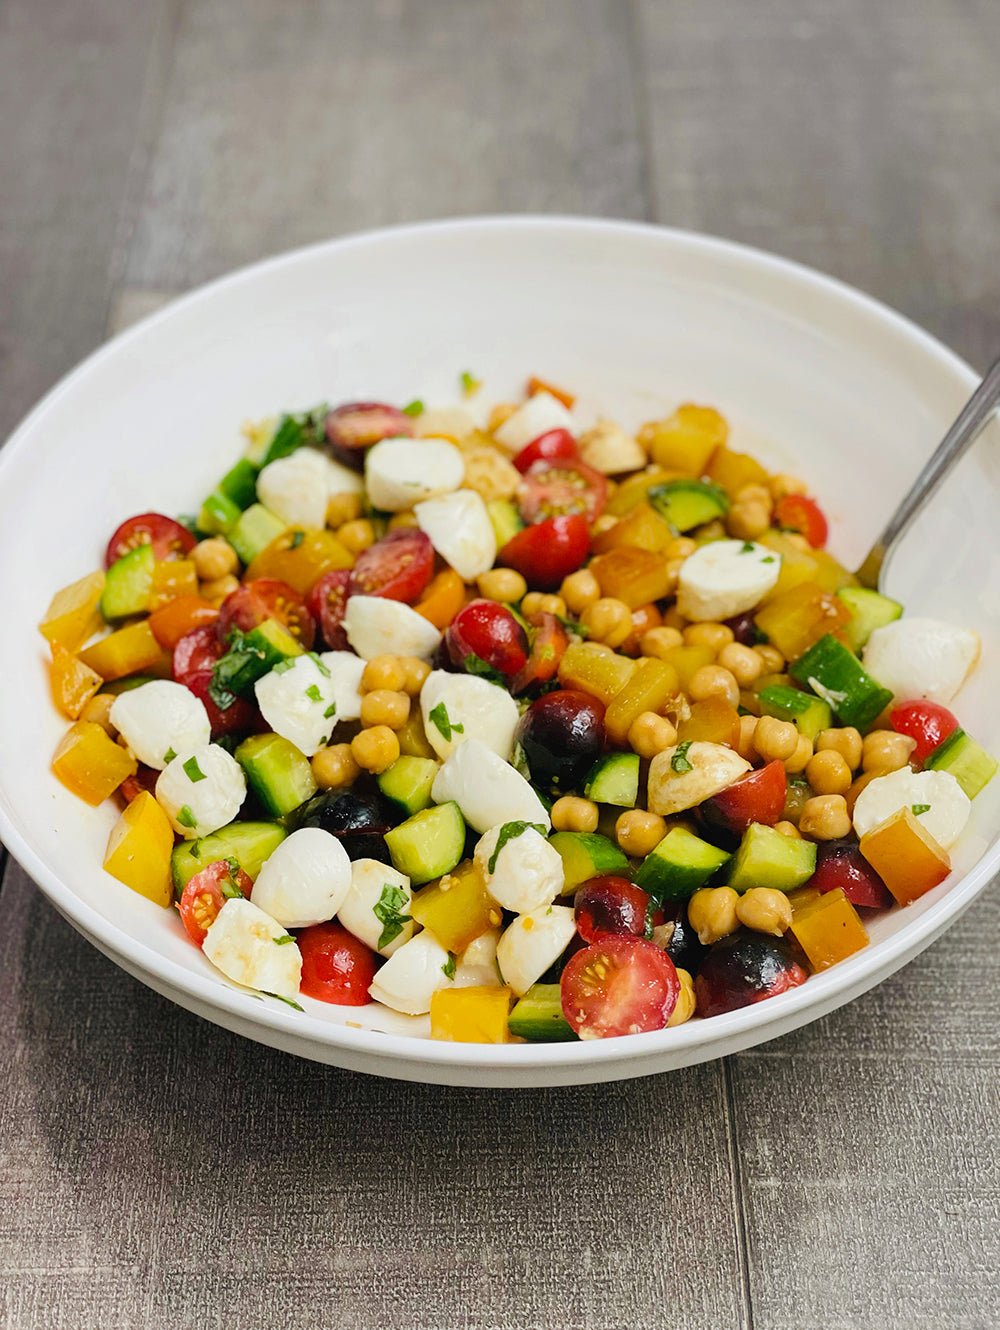 Healthy is Delish by Beth: End of Summer Salad